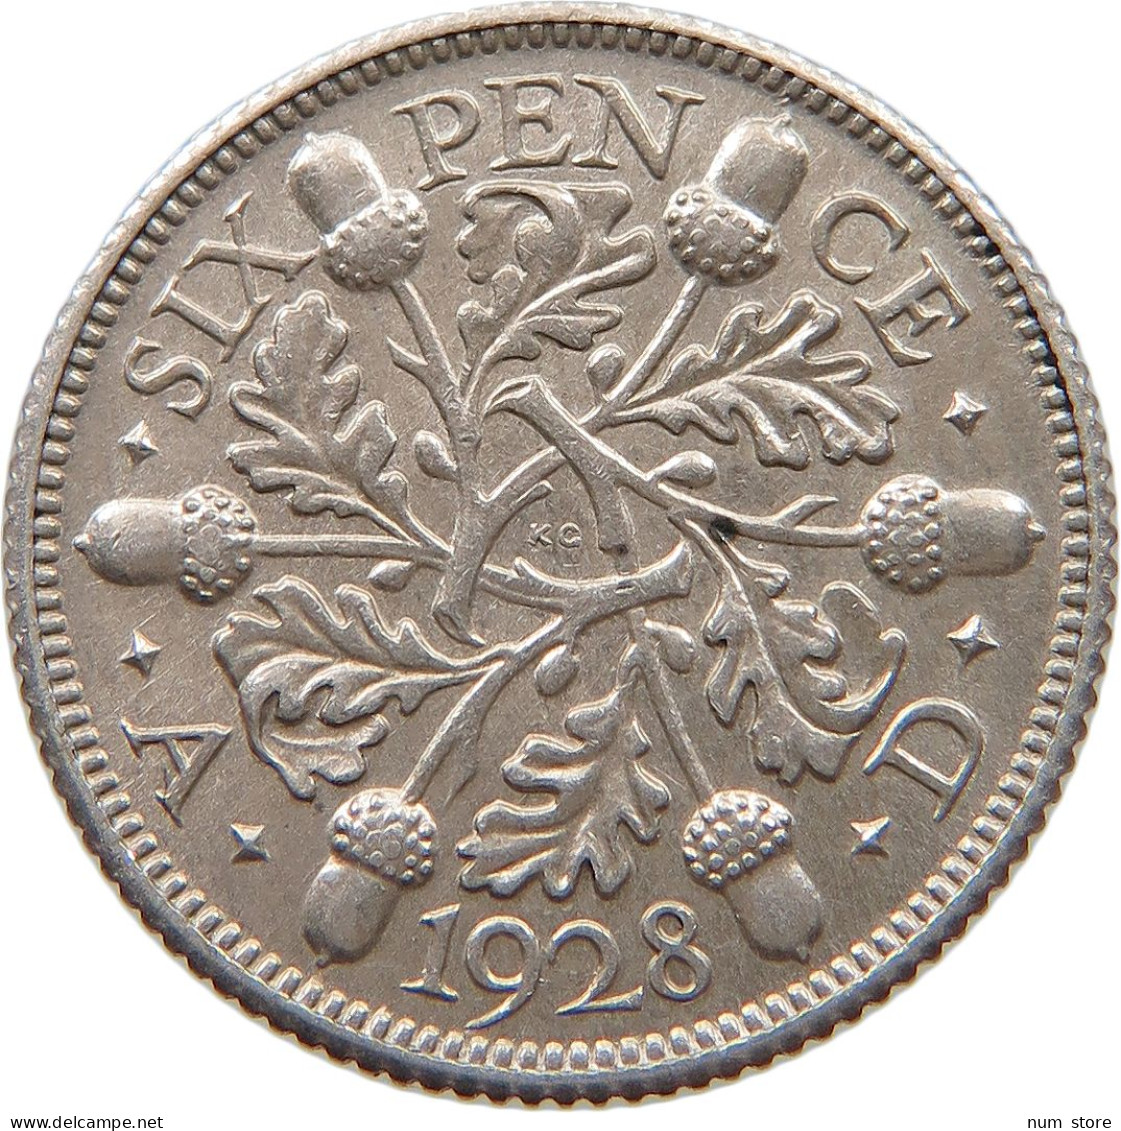 GREAT BRITAIN SIXPENCE 1928 George V. (1910-1936) #t115 0411 - H. 6 Pence